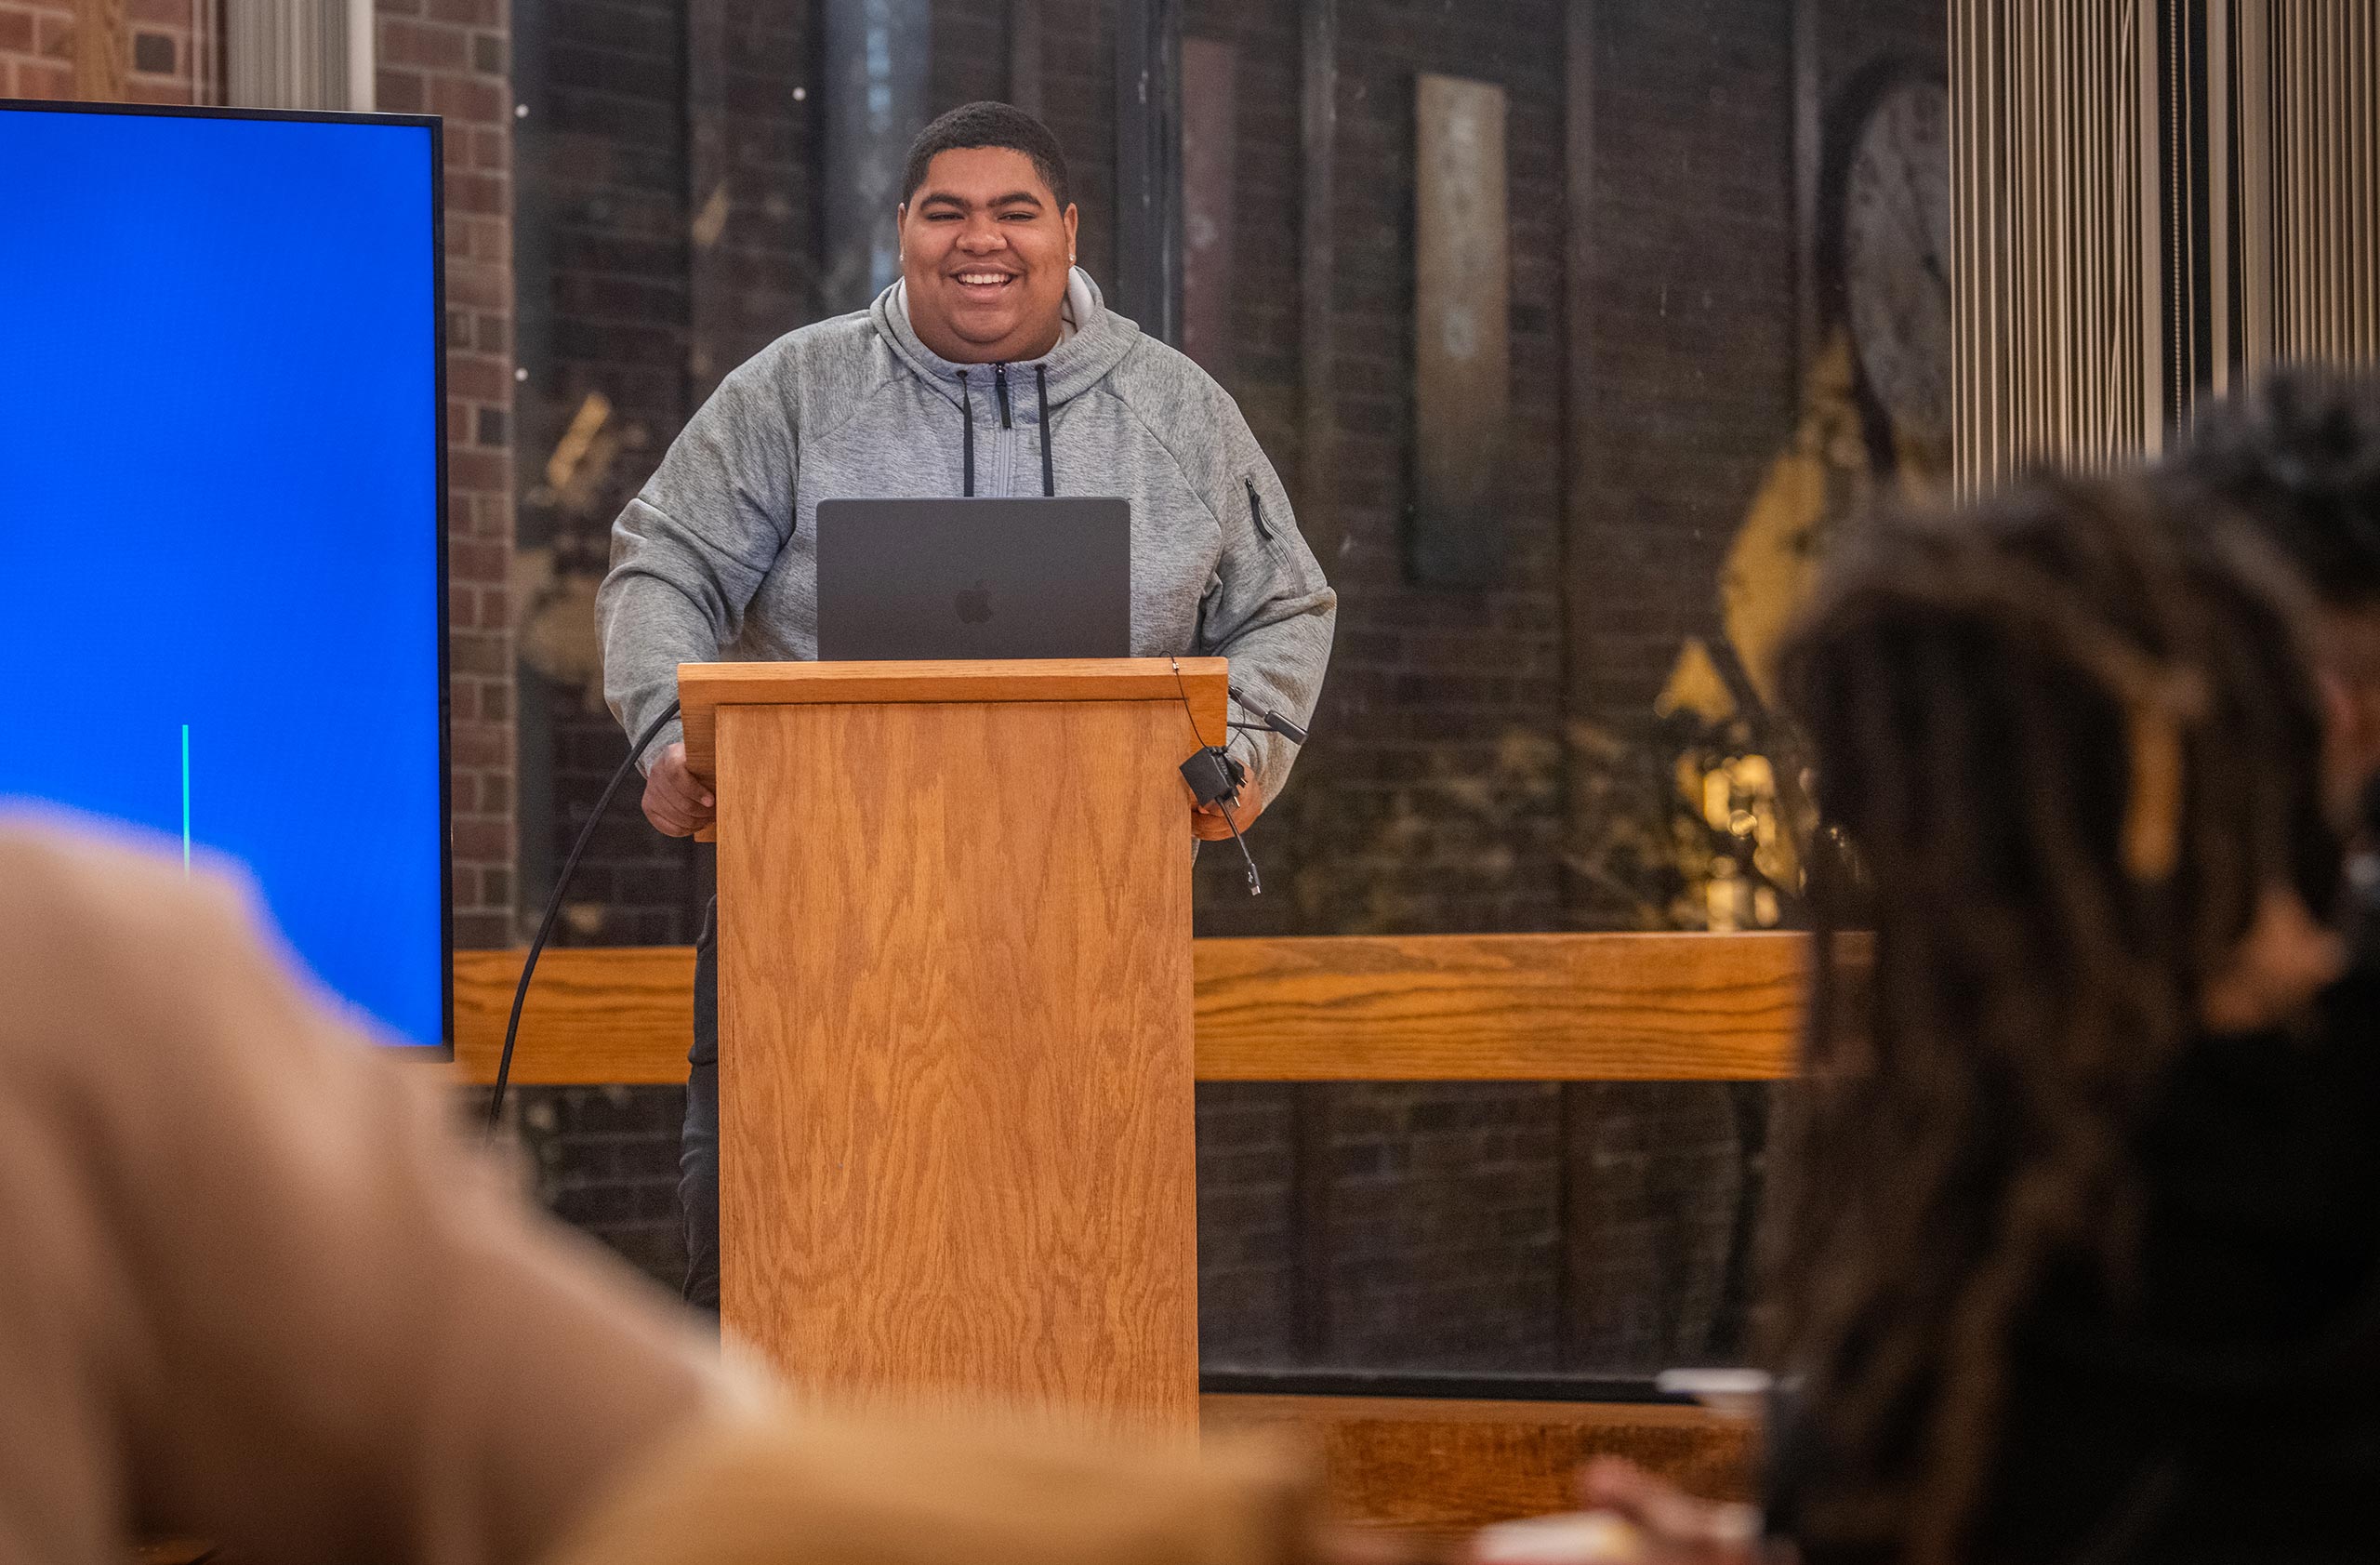 William Stafford '26 facilitates the conversation at an event held by the Men of Color Alliance at Clark University